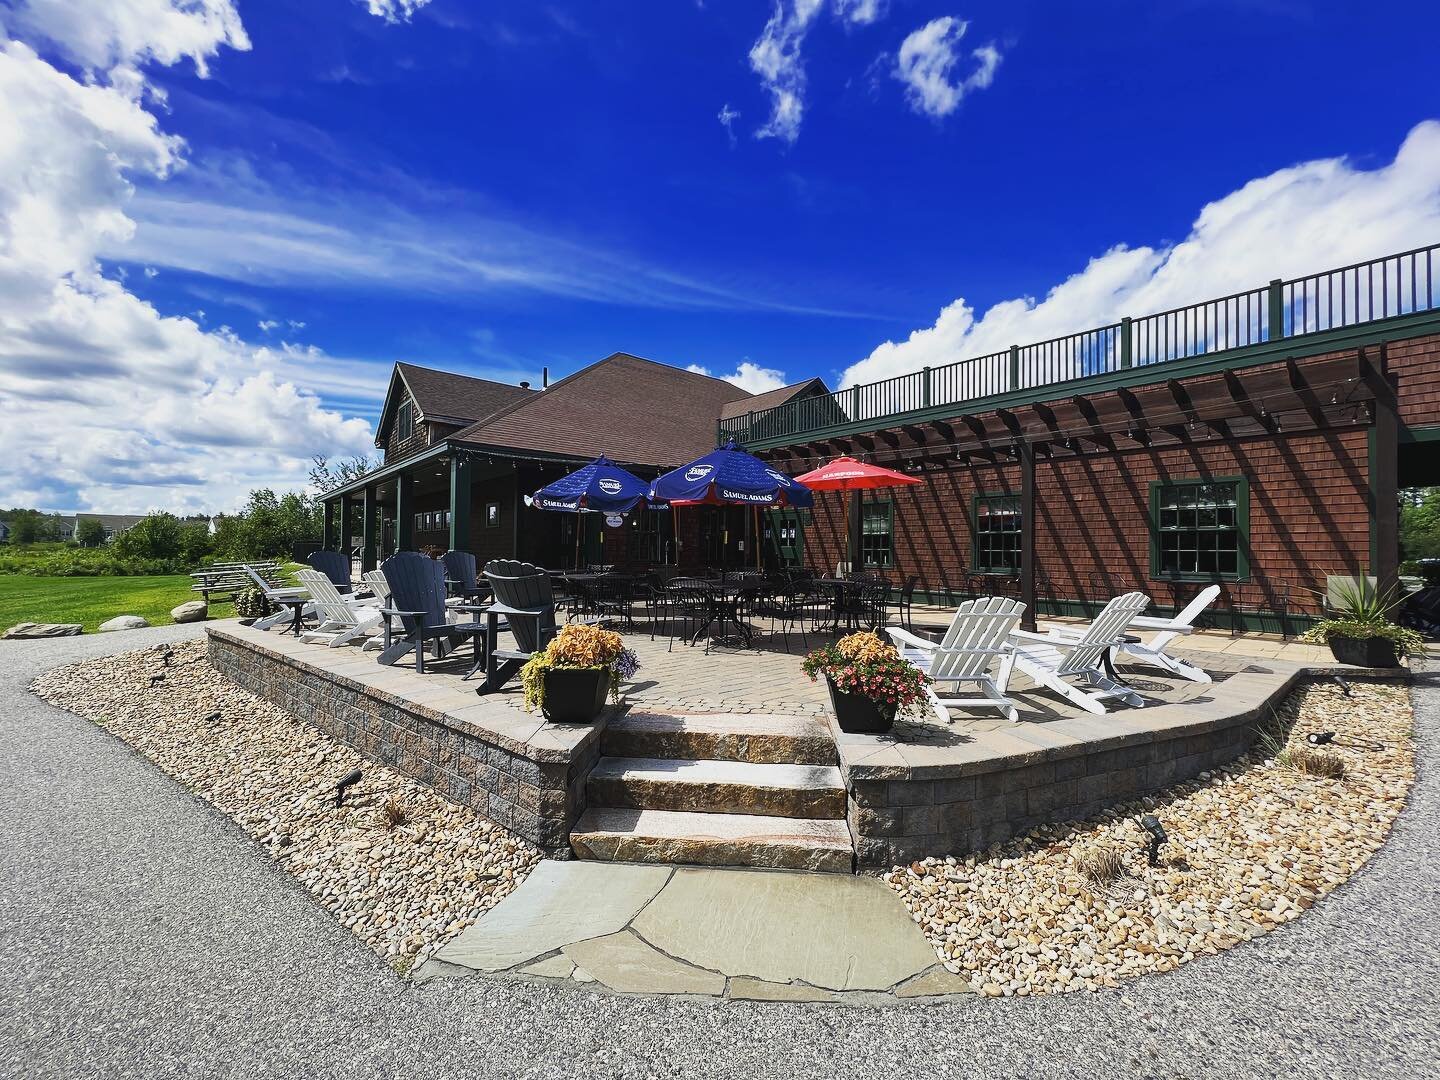 Our patios is a great spot to enjoy a great meal and an ice cold cocktail or local craft beer. Post up before or after your round end enjoy the beautiful views of the course. This weekend looks mint, get your tee times at www.OldMarshCountryClub.com 